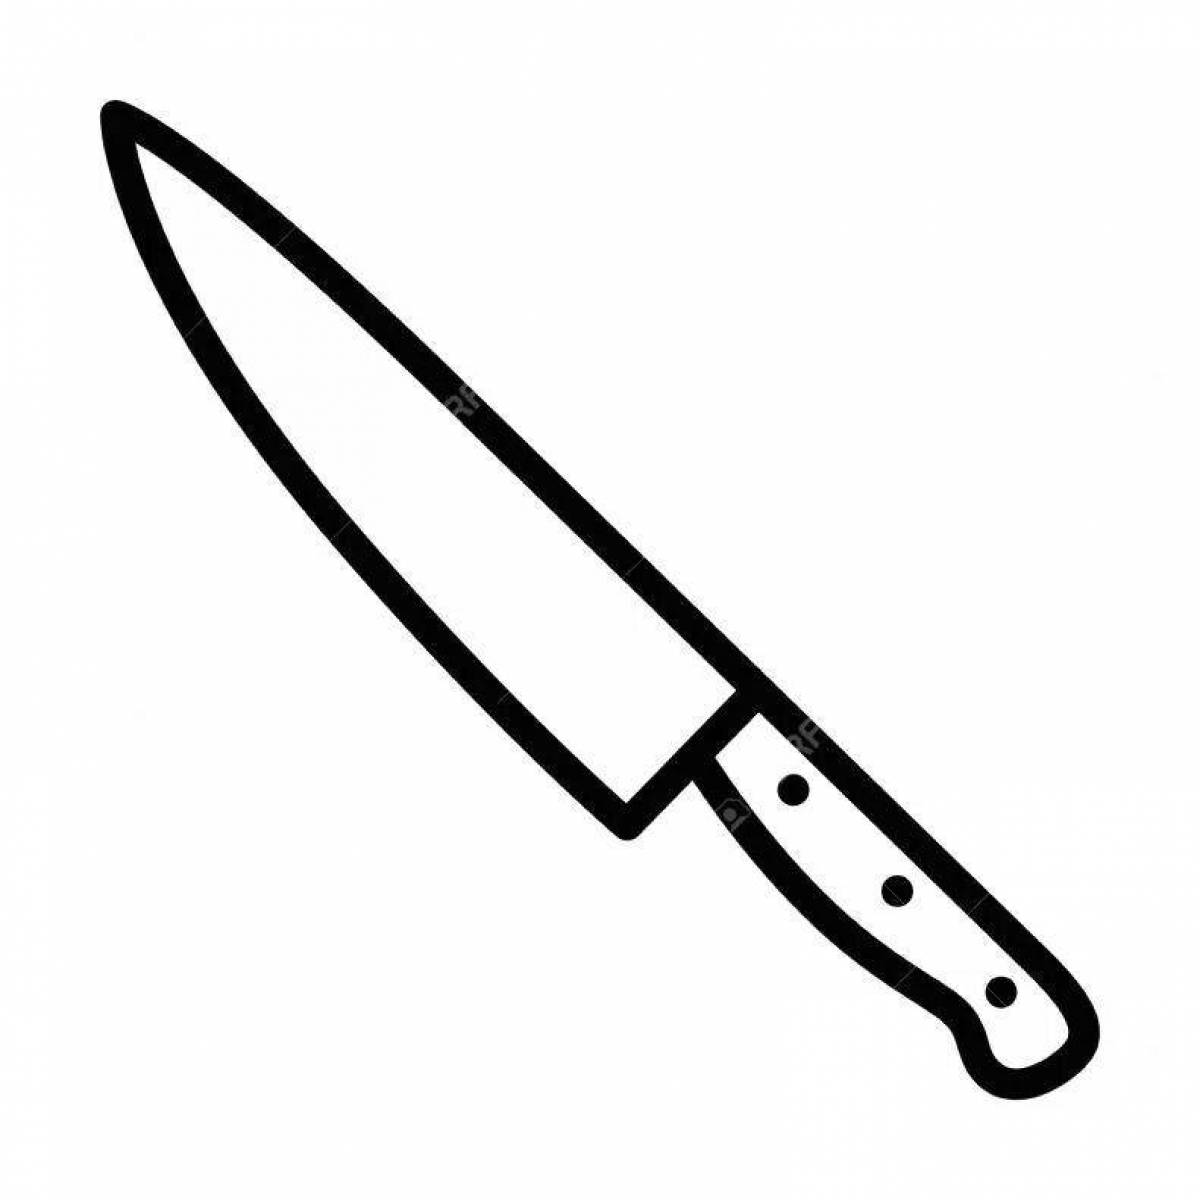 Fabulous knife coloring book for kids